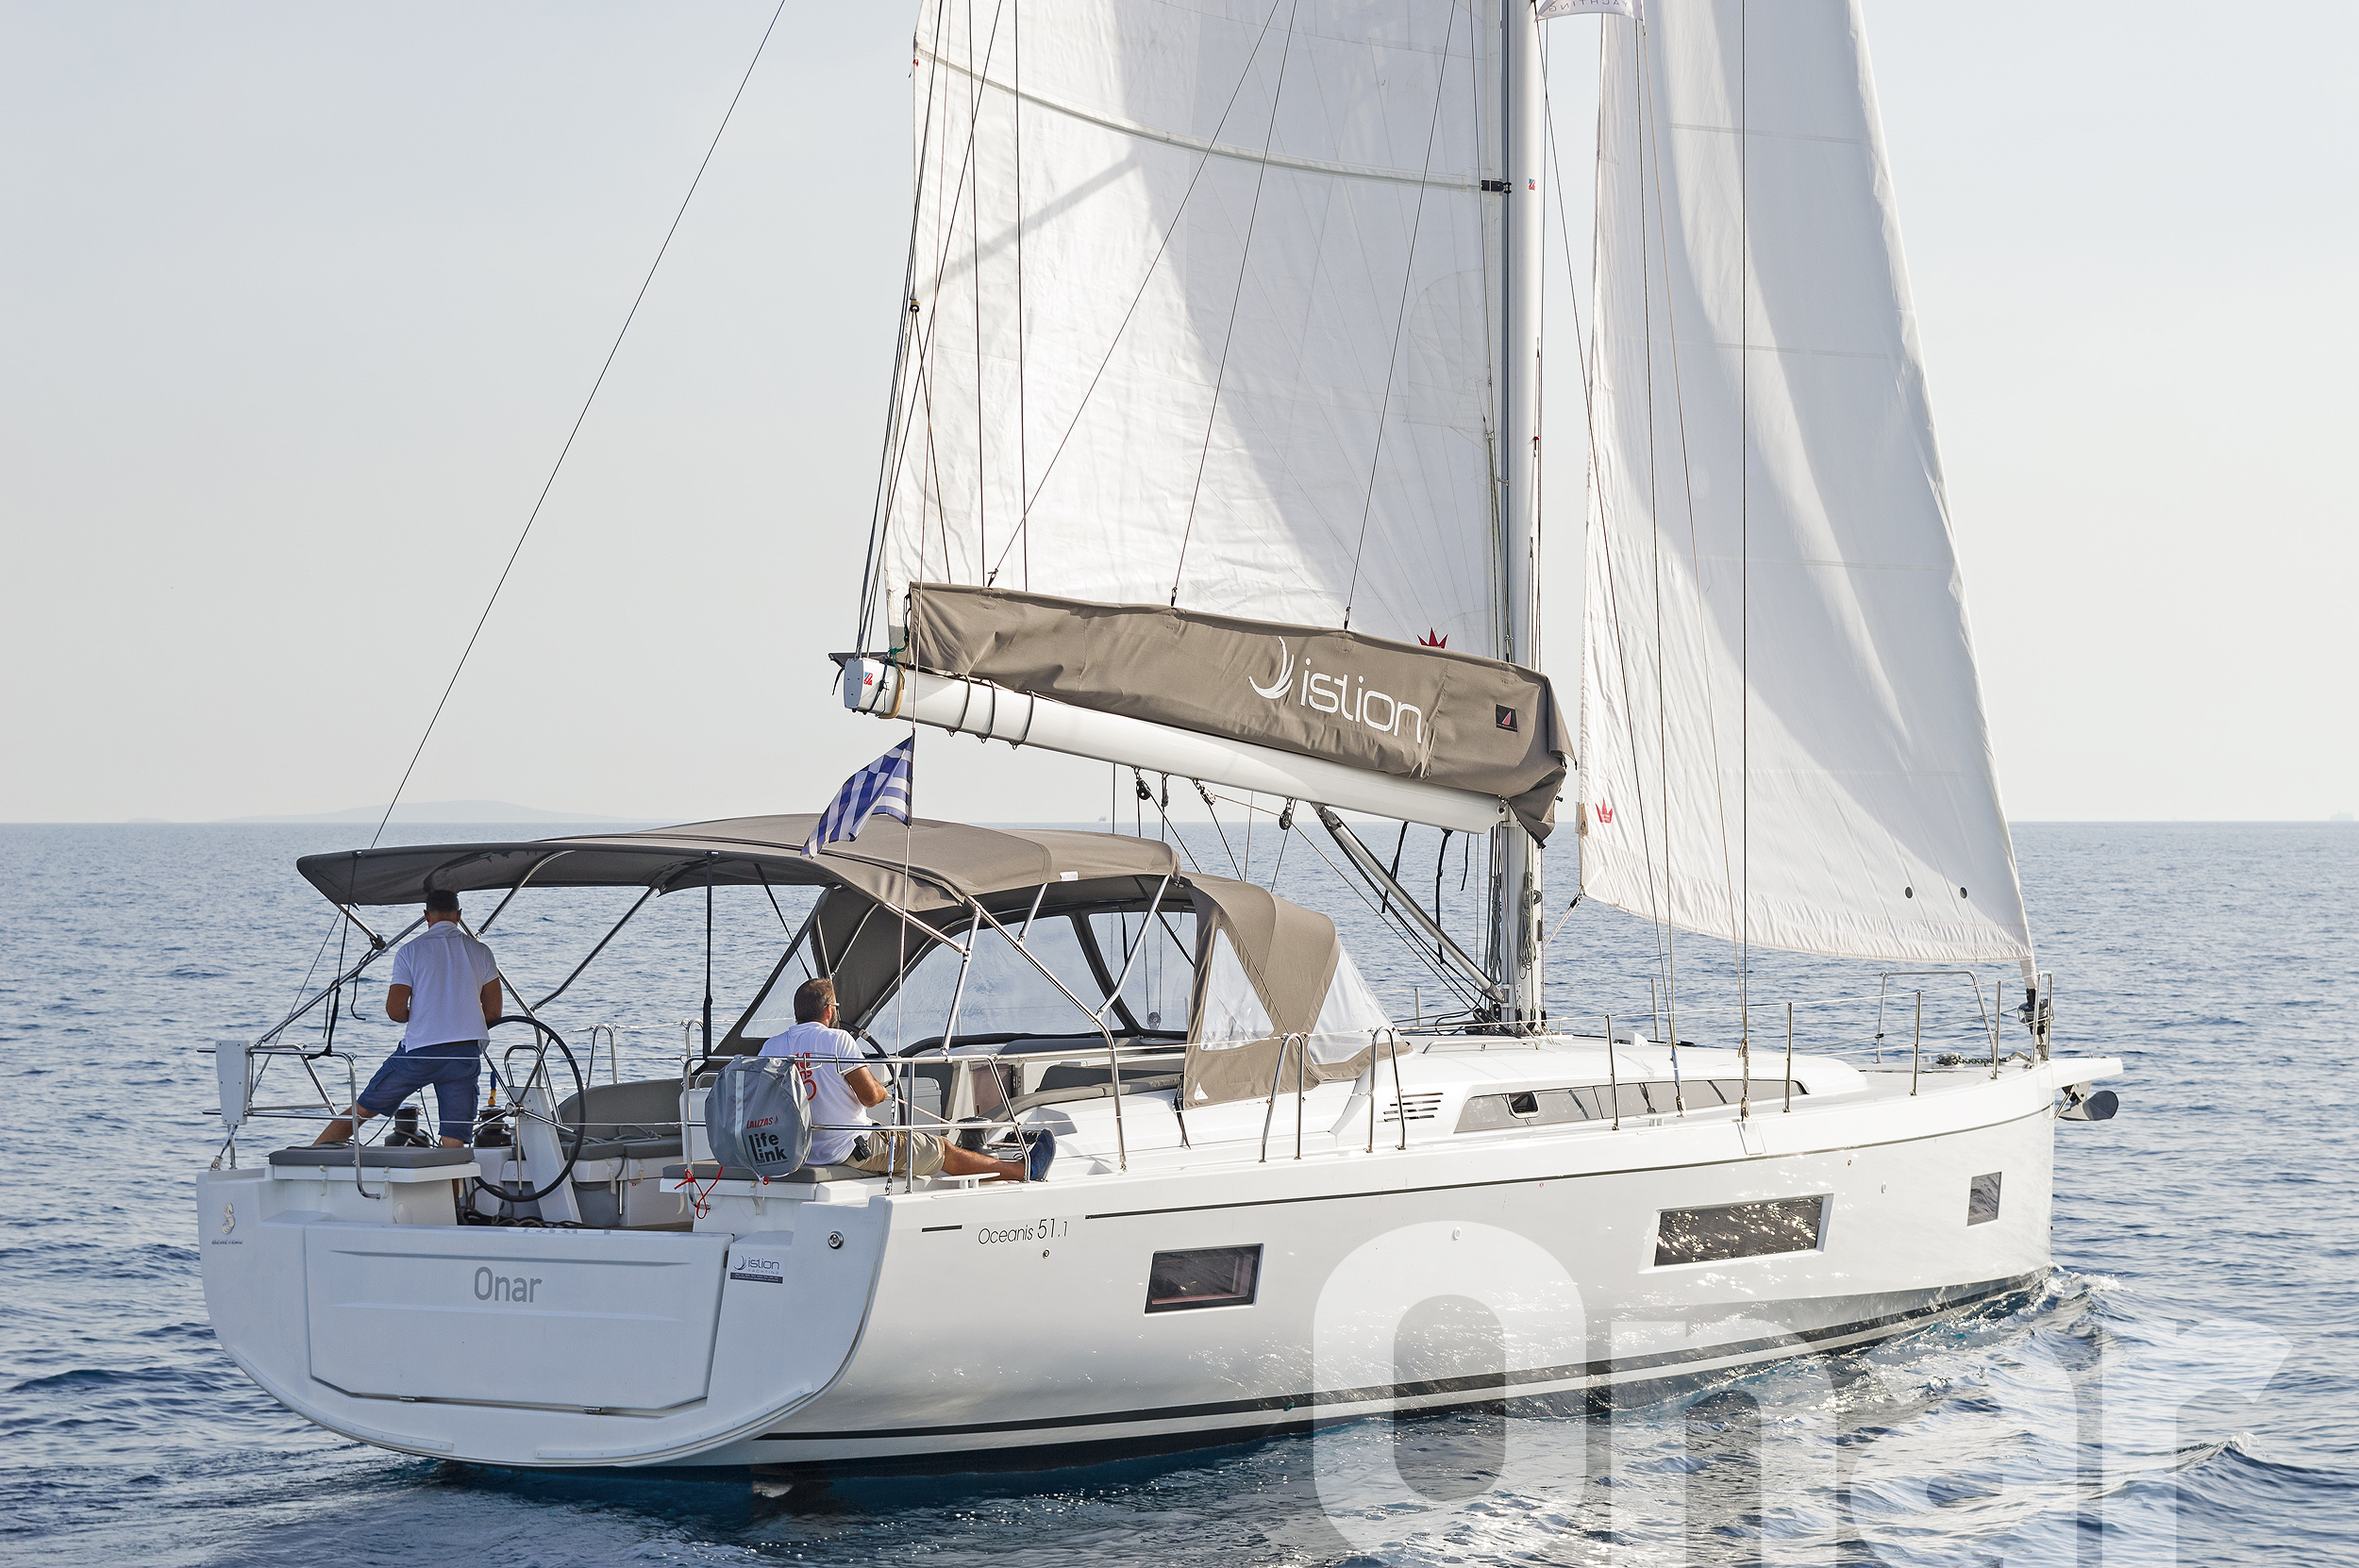 Oceanis 51.1 - Yacht Charter Lindigo & Boat hire in Greece Athens and Saronic Gulf Athens Alimos Alimos Marina 1